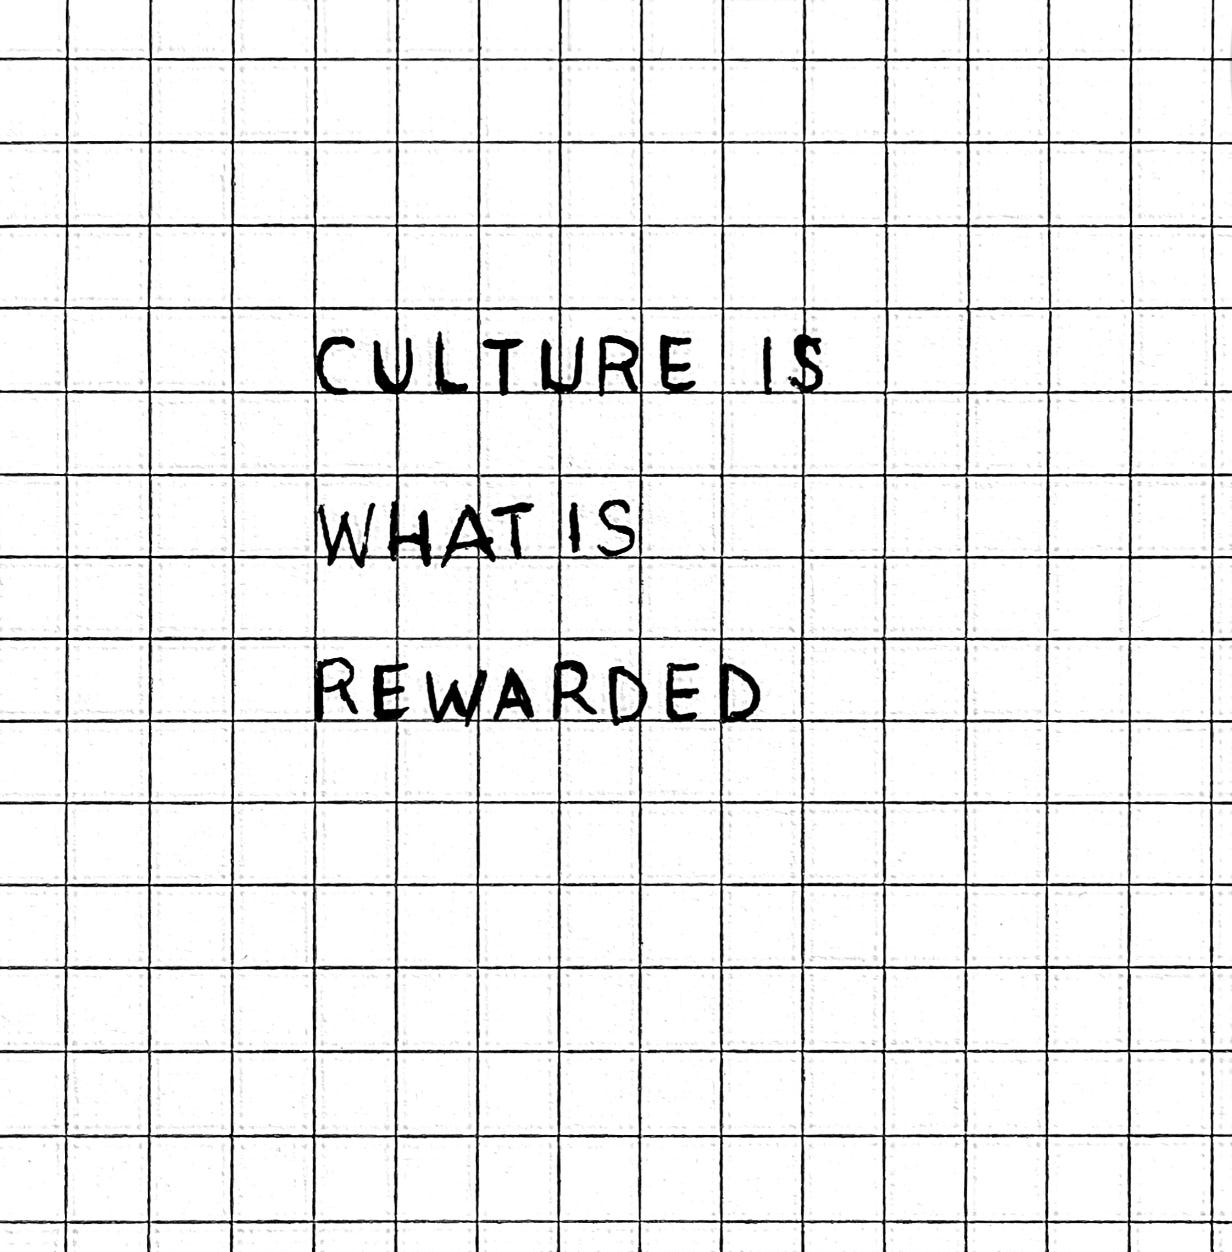 Culture is what is rewarded